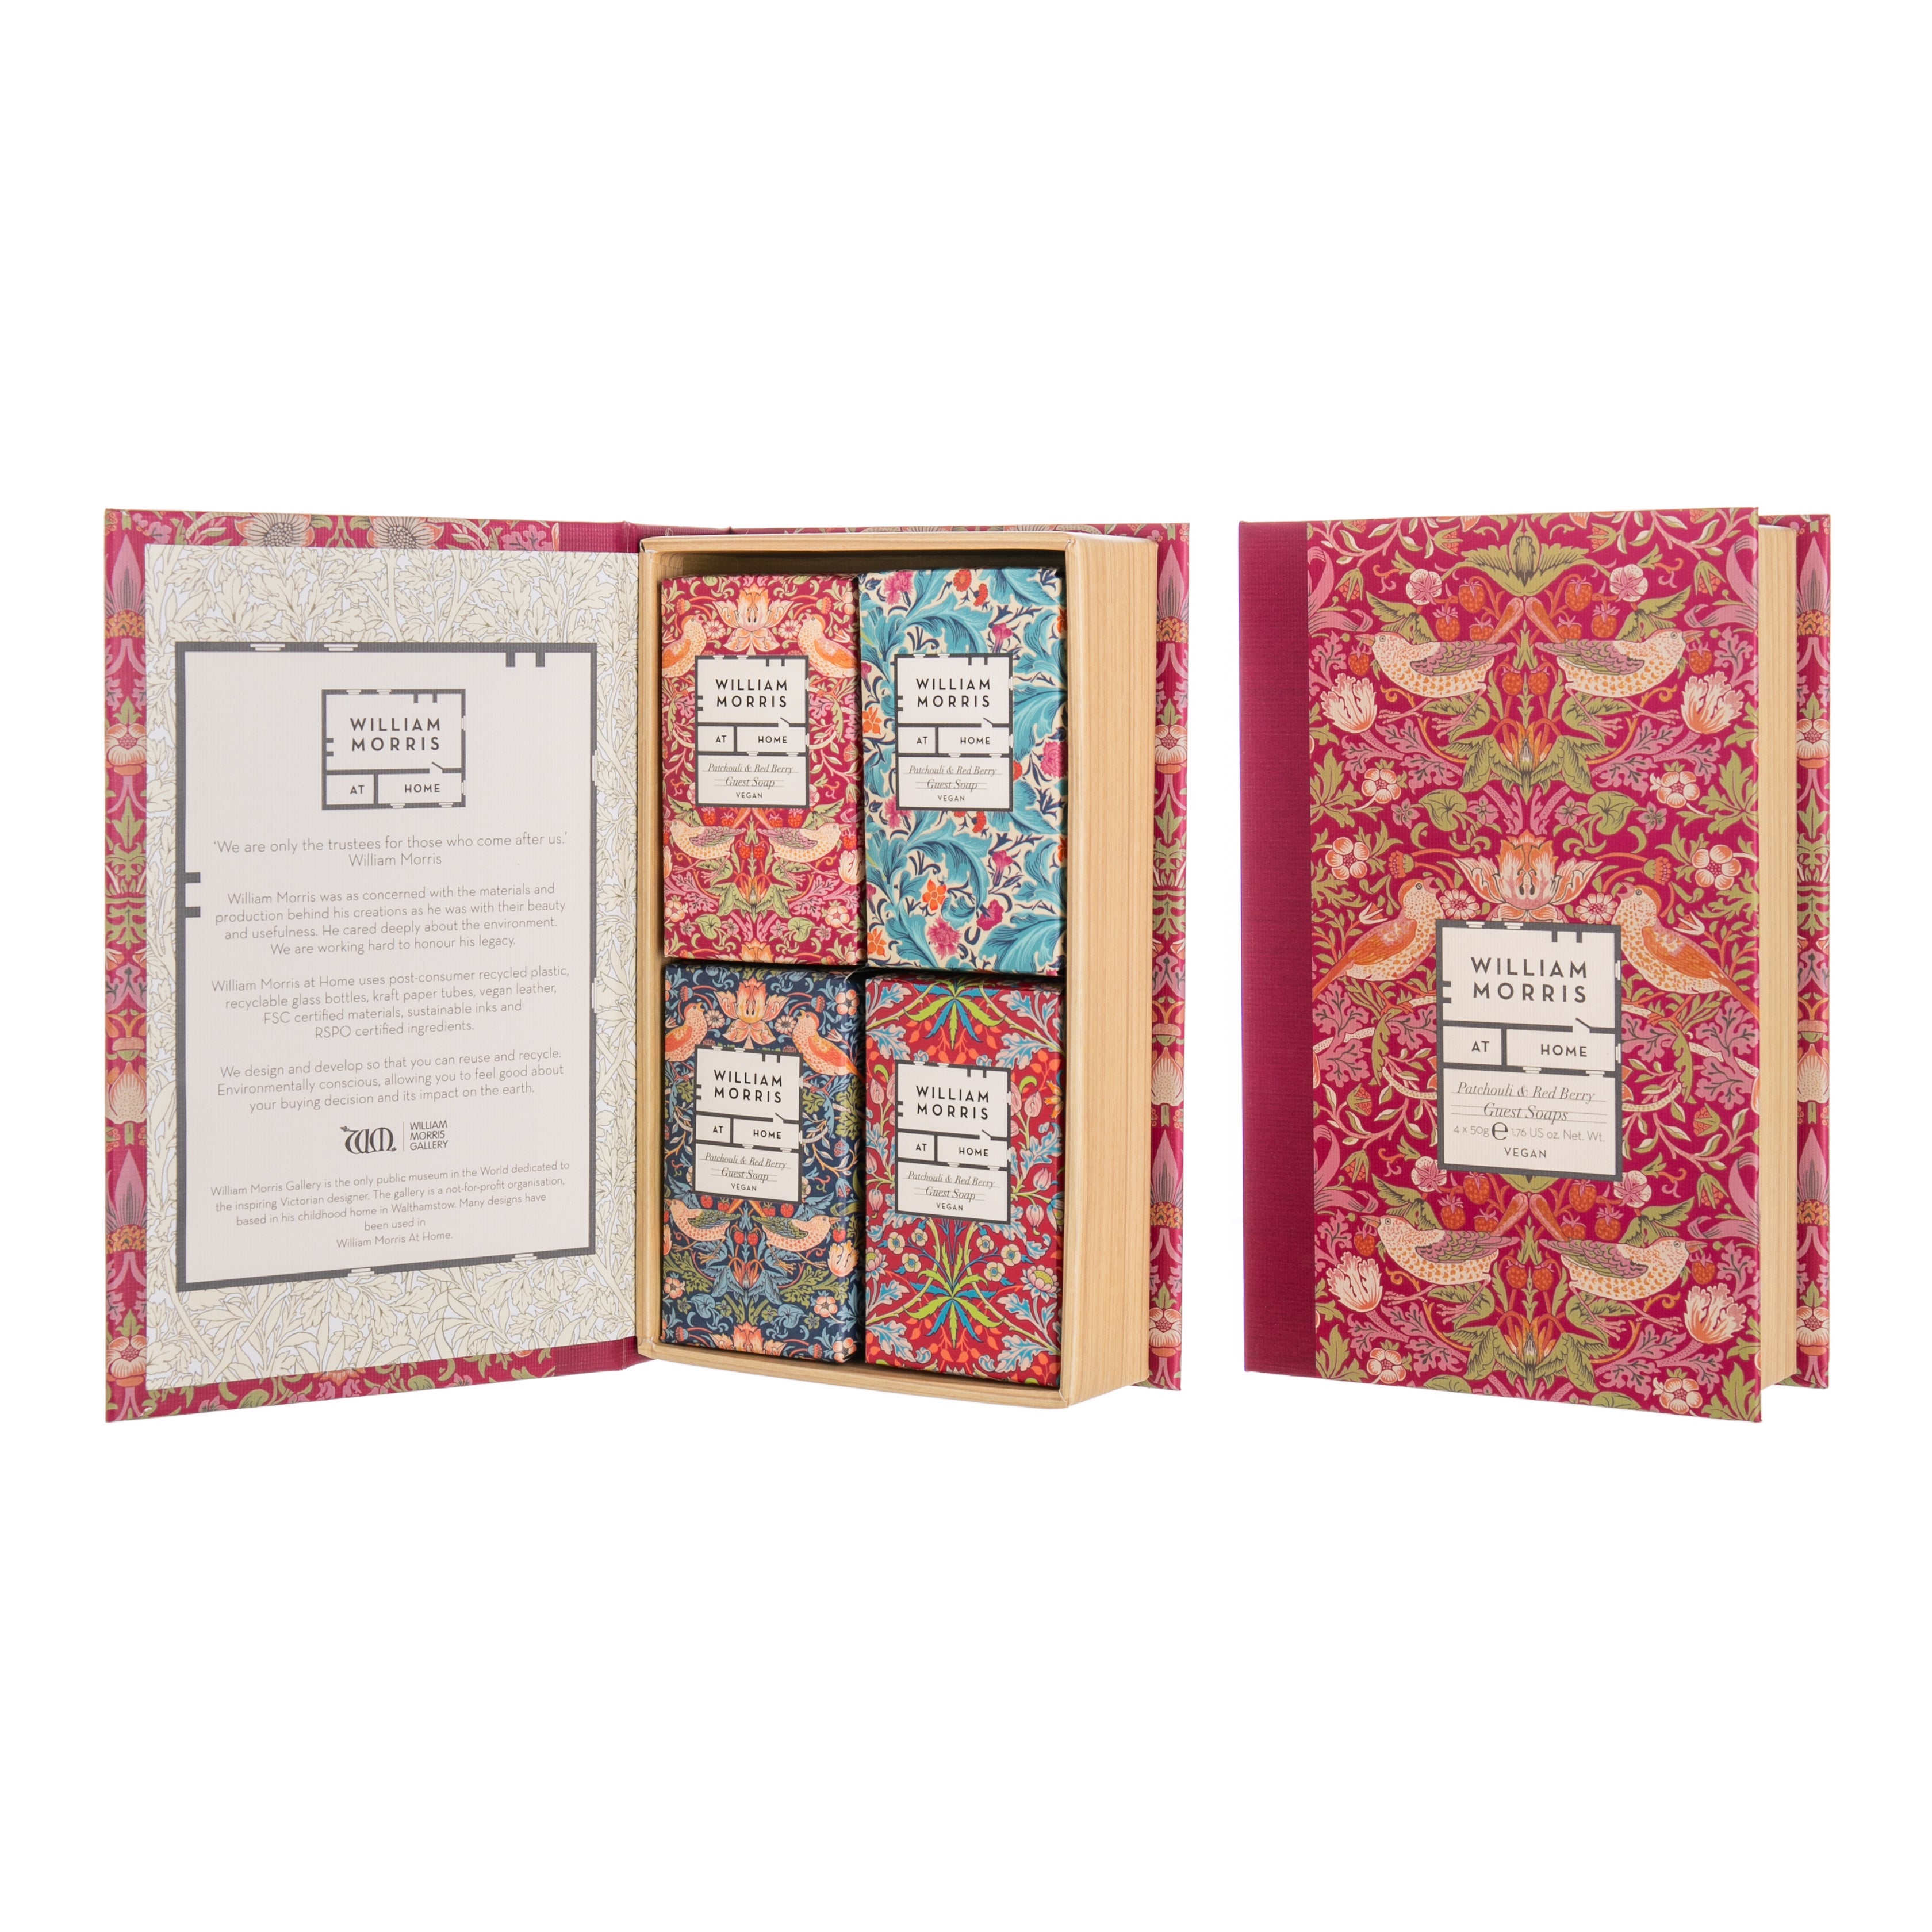 RedBerry Guest Books